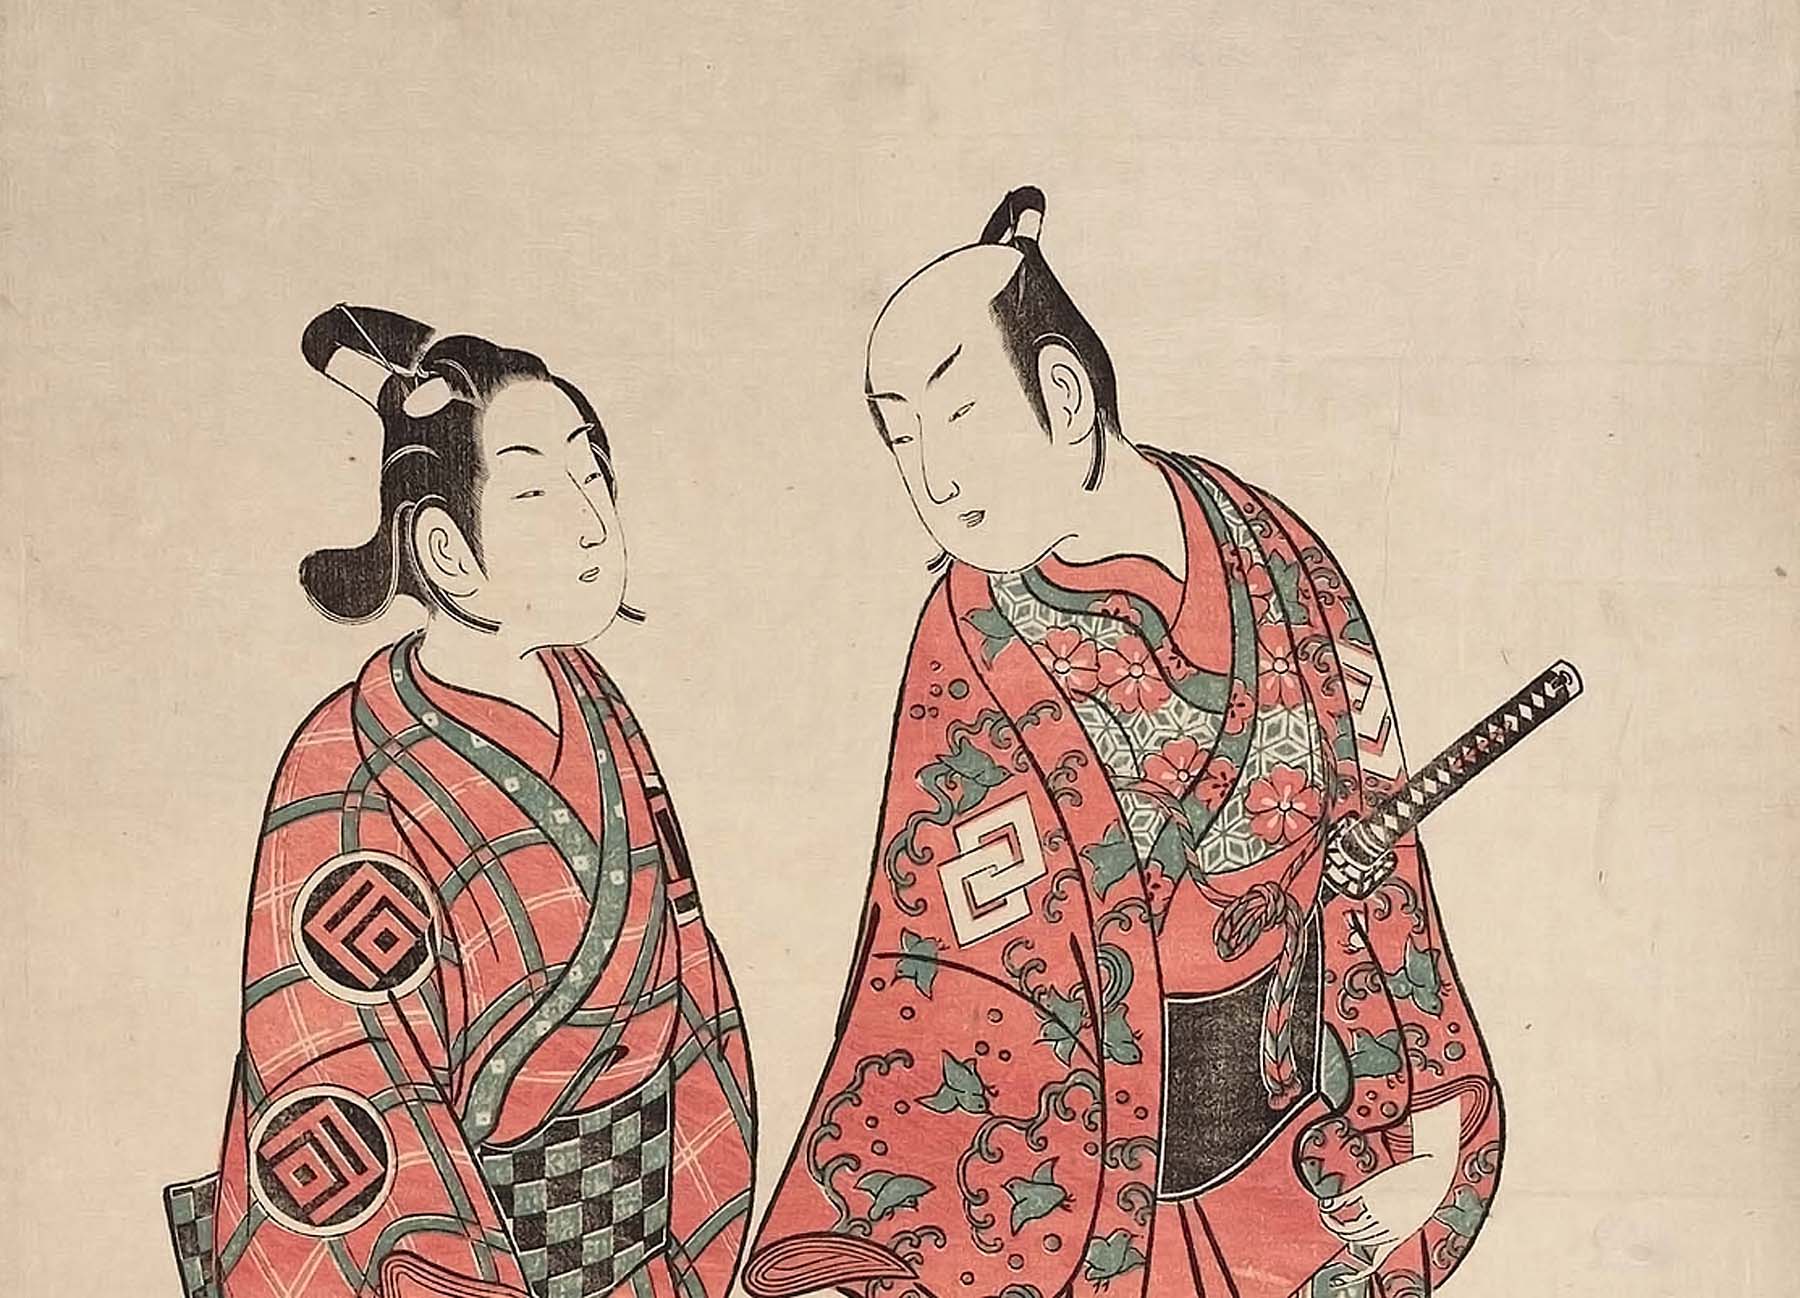 Young love: A woodblock print by Ishikawa Toyonobu (circa 1740) shows two actors portraying a relationship between a wakashū  (adolescent male) and an adult man (right). | PUBLIC DOMAIN